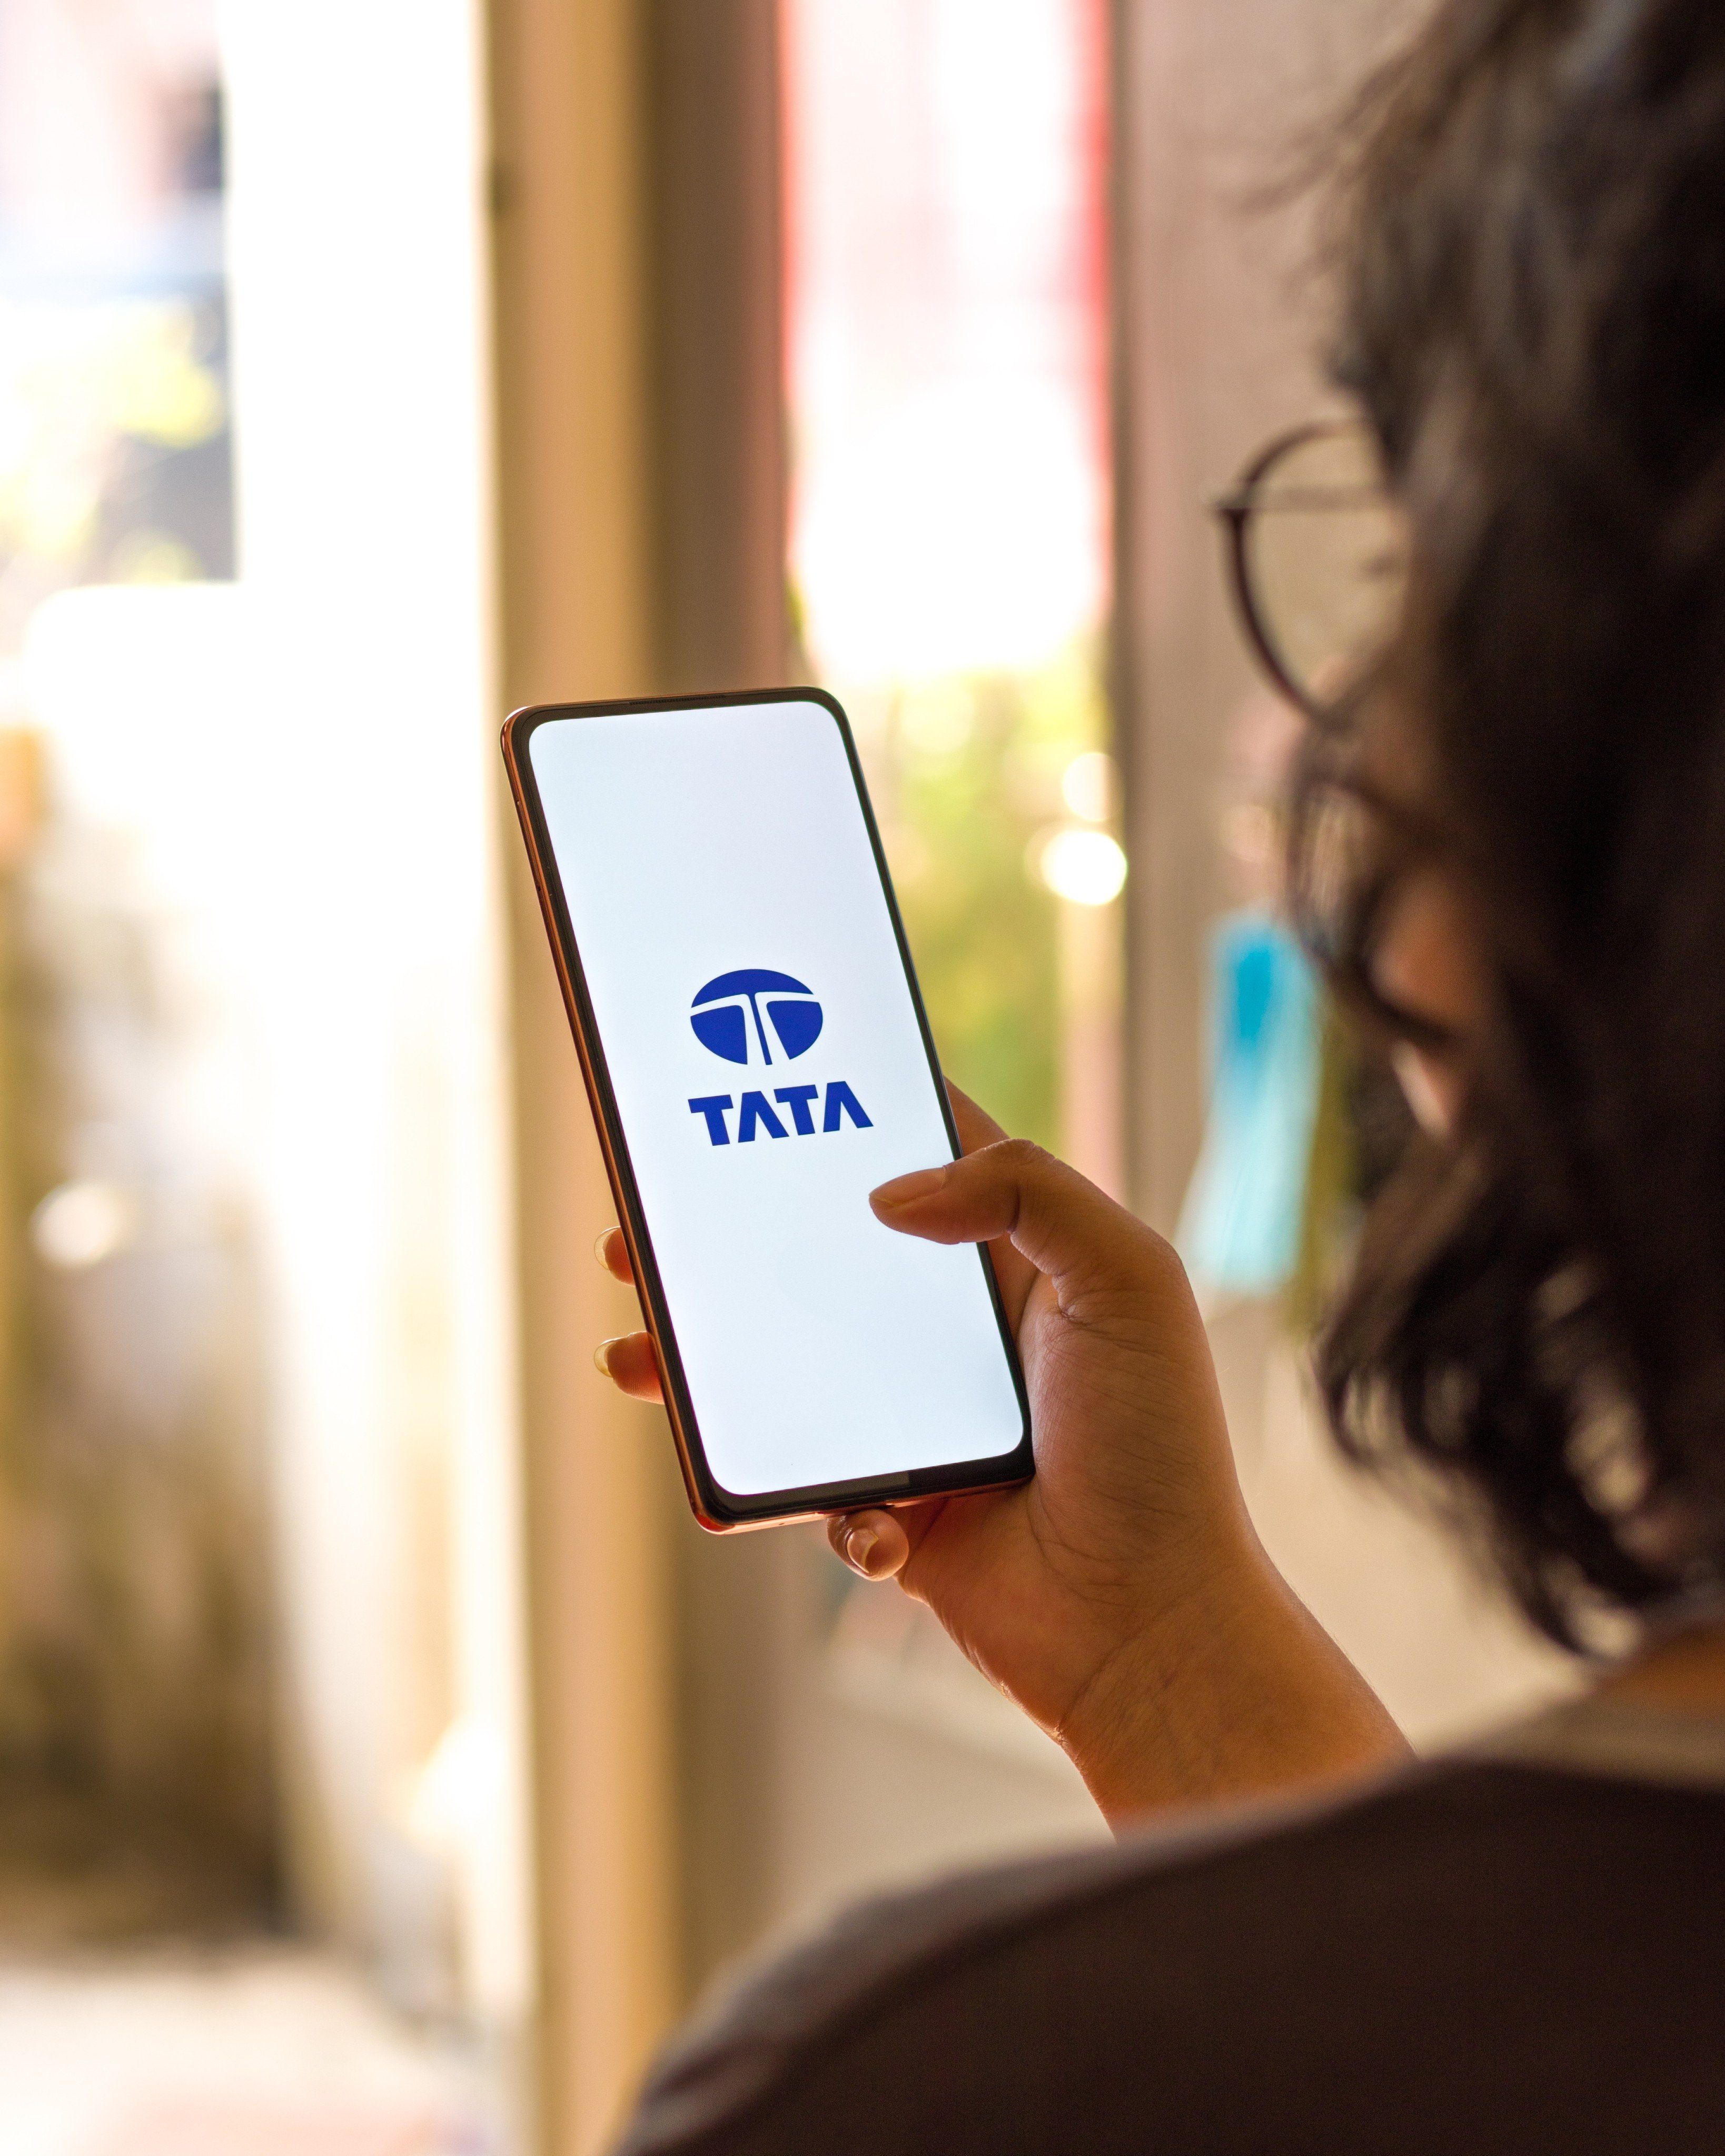 Vivo’s potential deal with Tata reflects the Indian conglomerate’s growing ambitions in smartphone manufacturing. Photo: Shutterstock